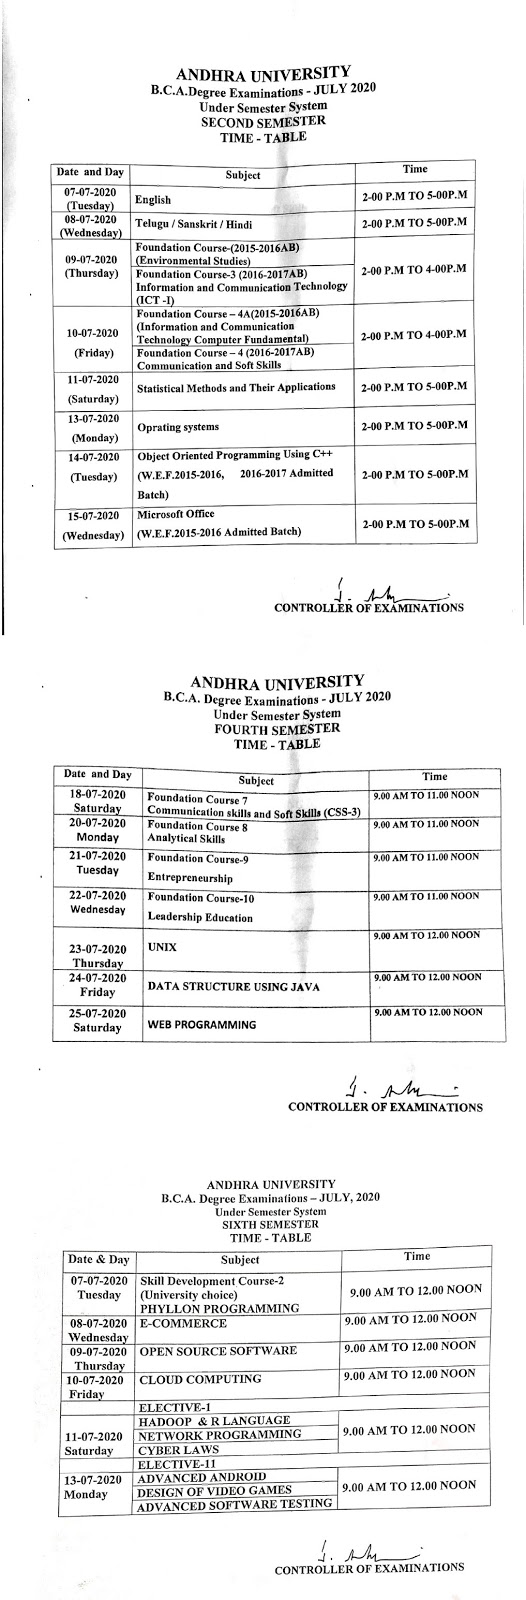 andhra university bca 2nd, 4th & 6th sem july 2020 revised time table